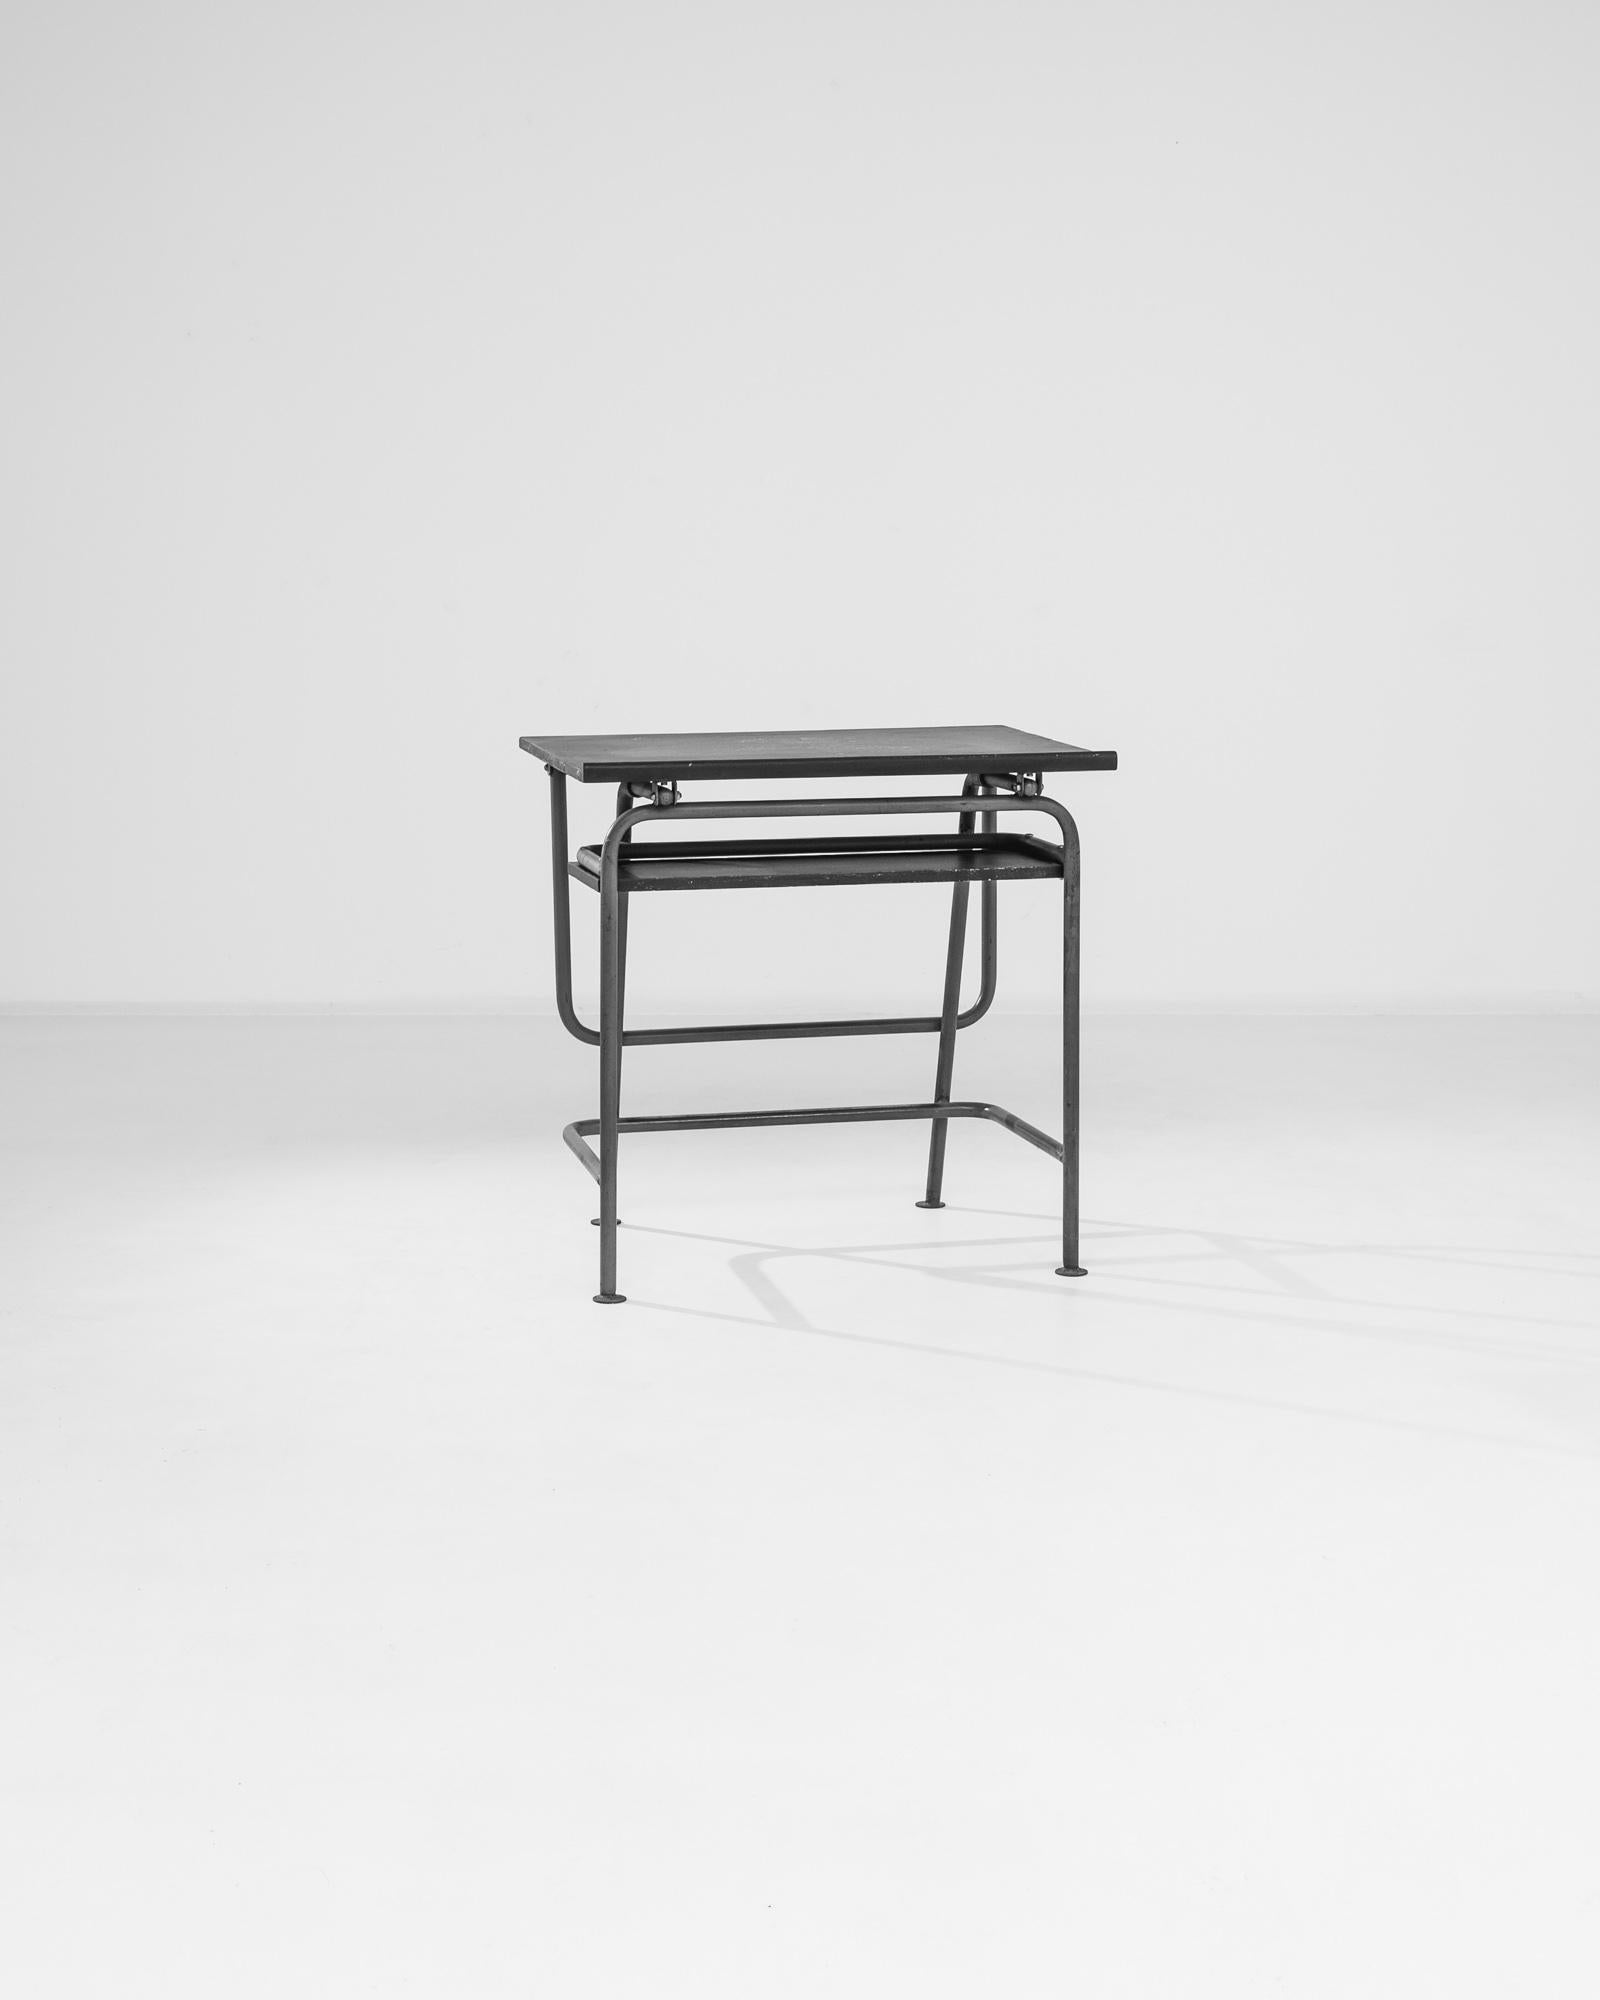 Transport yourself back to the charming classrooms of the 1960s with this vintage Czech metal school desk, a nostalgic piece that exudes simplicity and functionality. Crafted from sturdy black metal with various supporting bars, this desk stands the